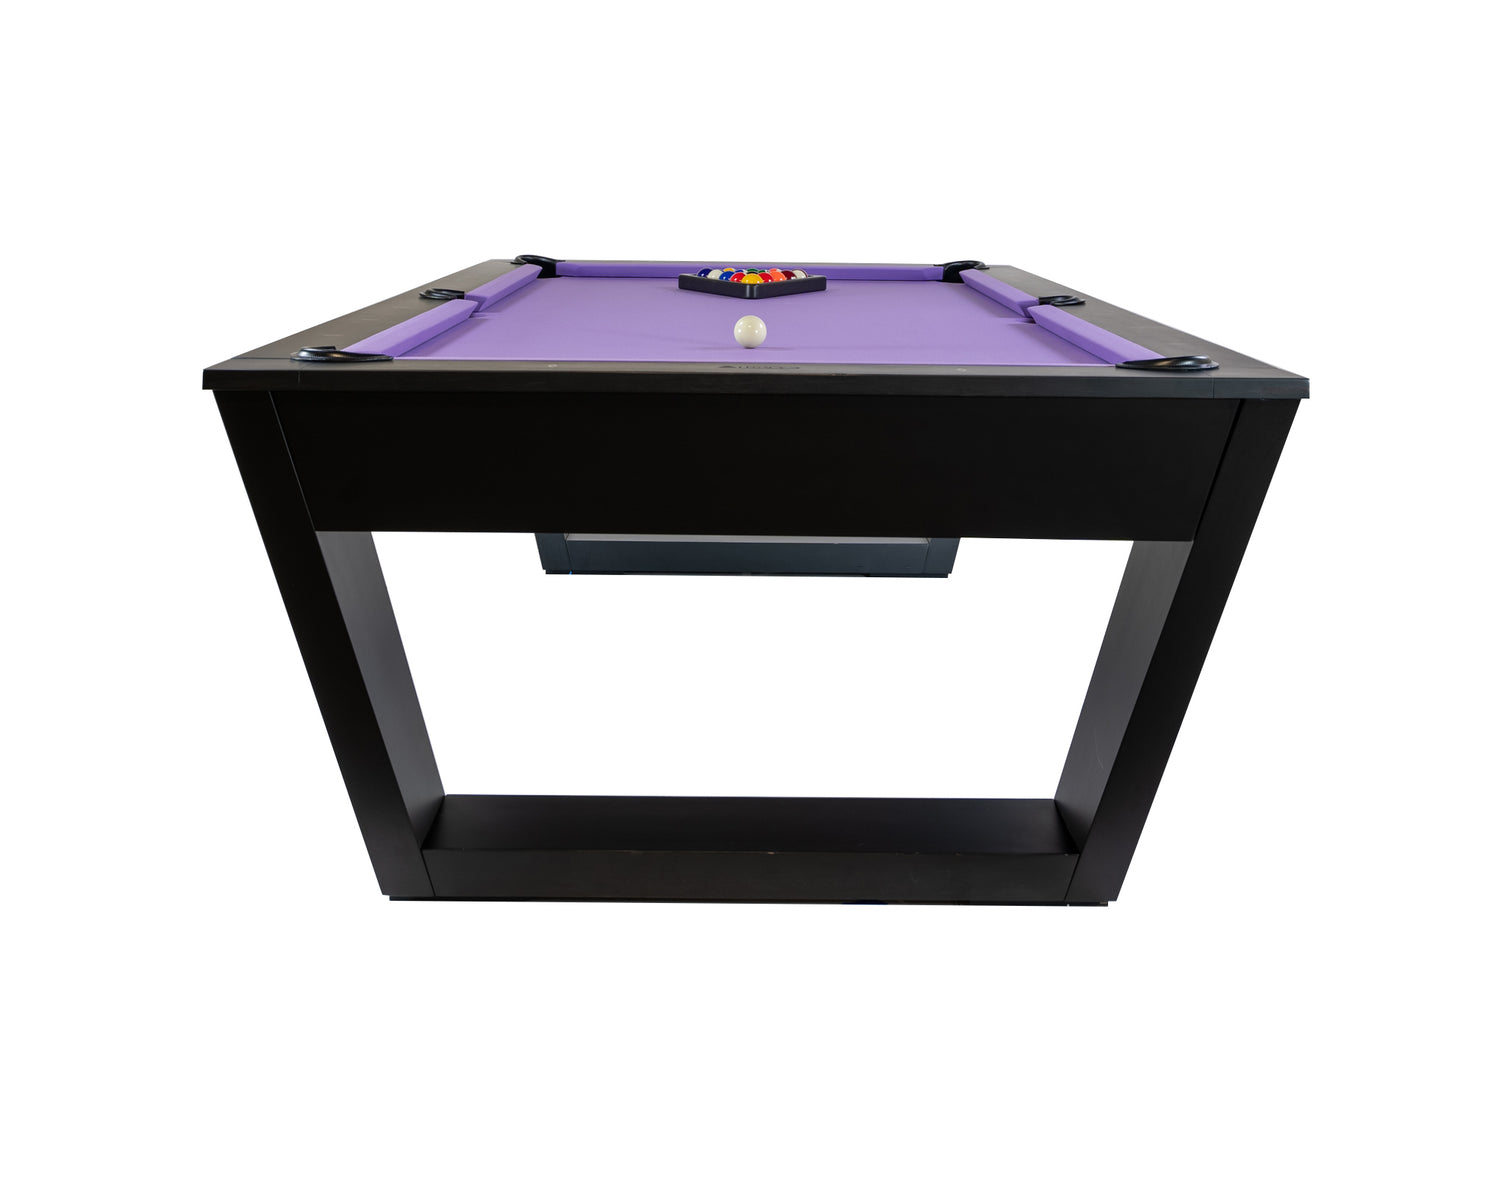 Legacy Billiards Tellico 8 Ft Pool Table in Raven Finish End View with Racked Pool Balls